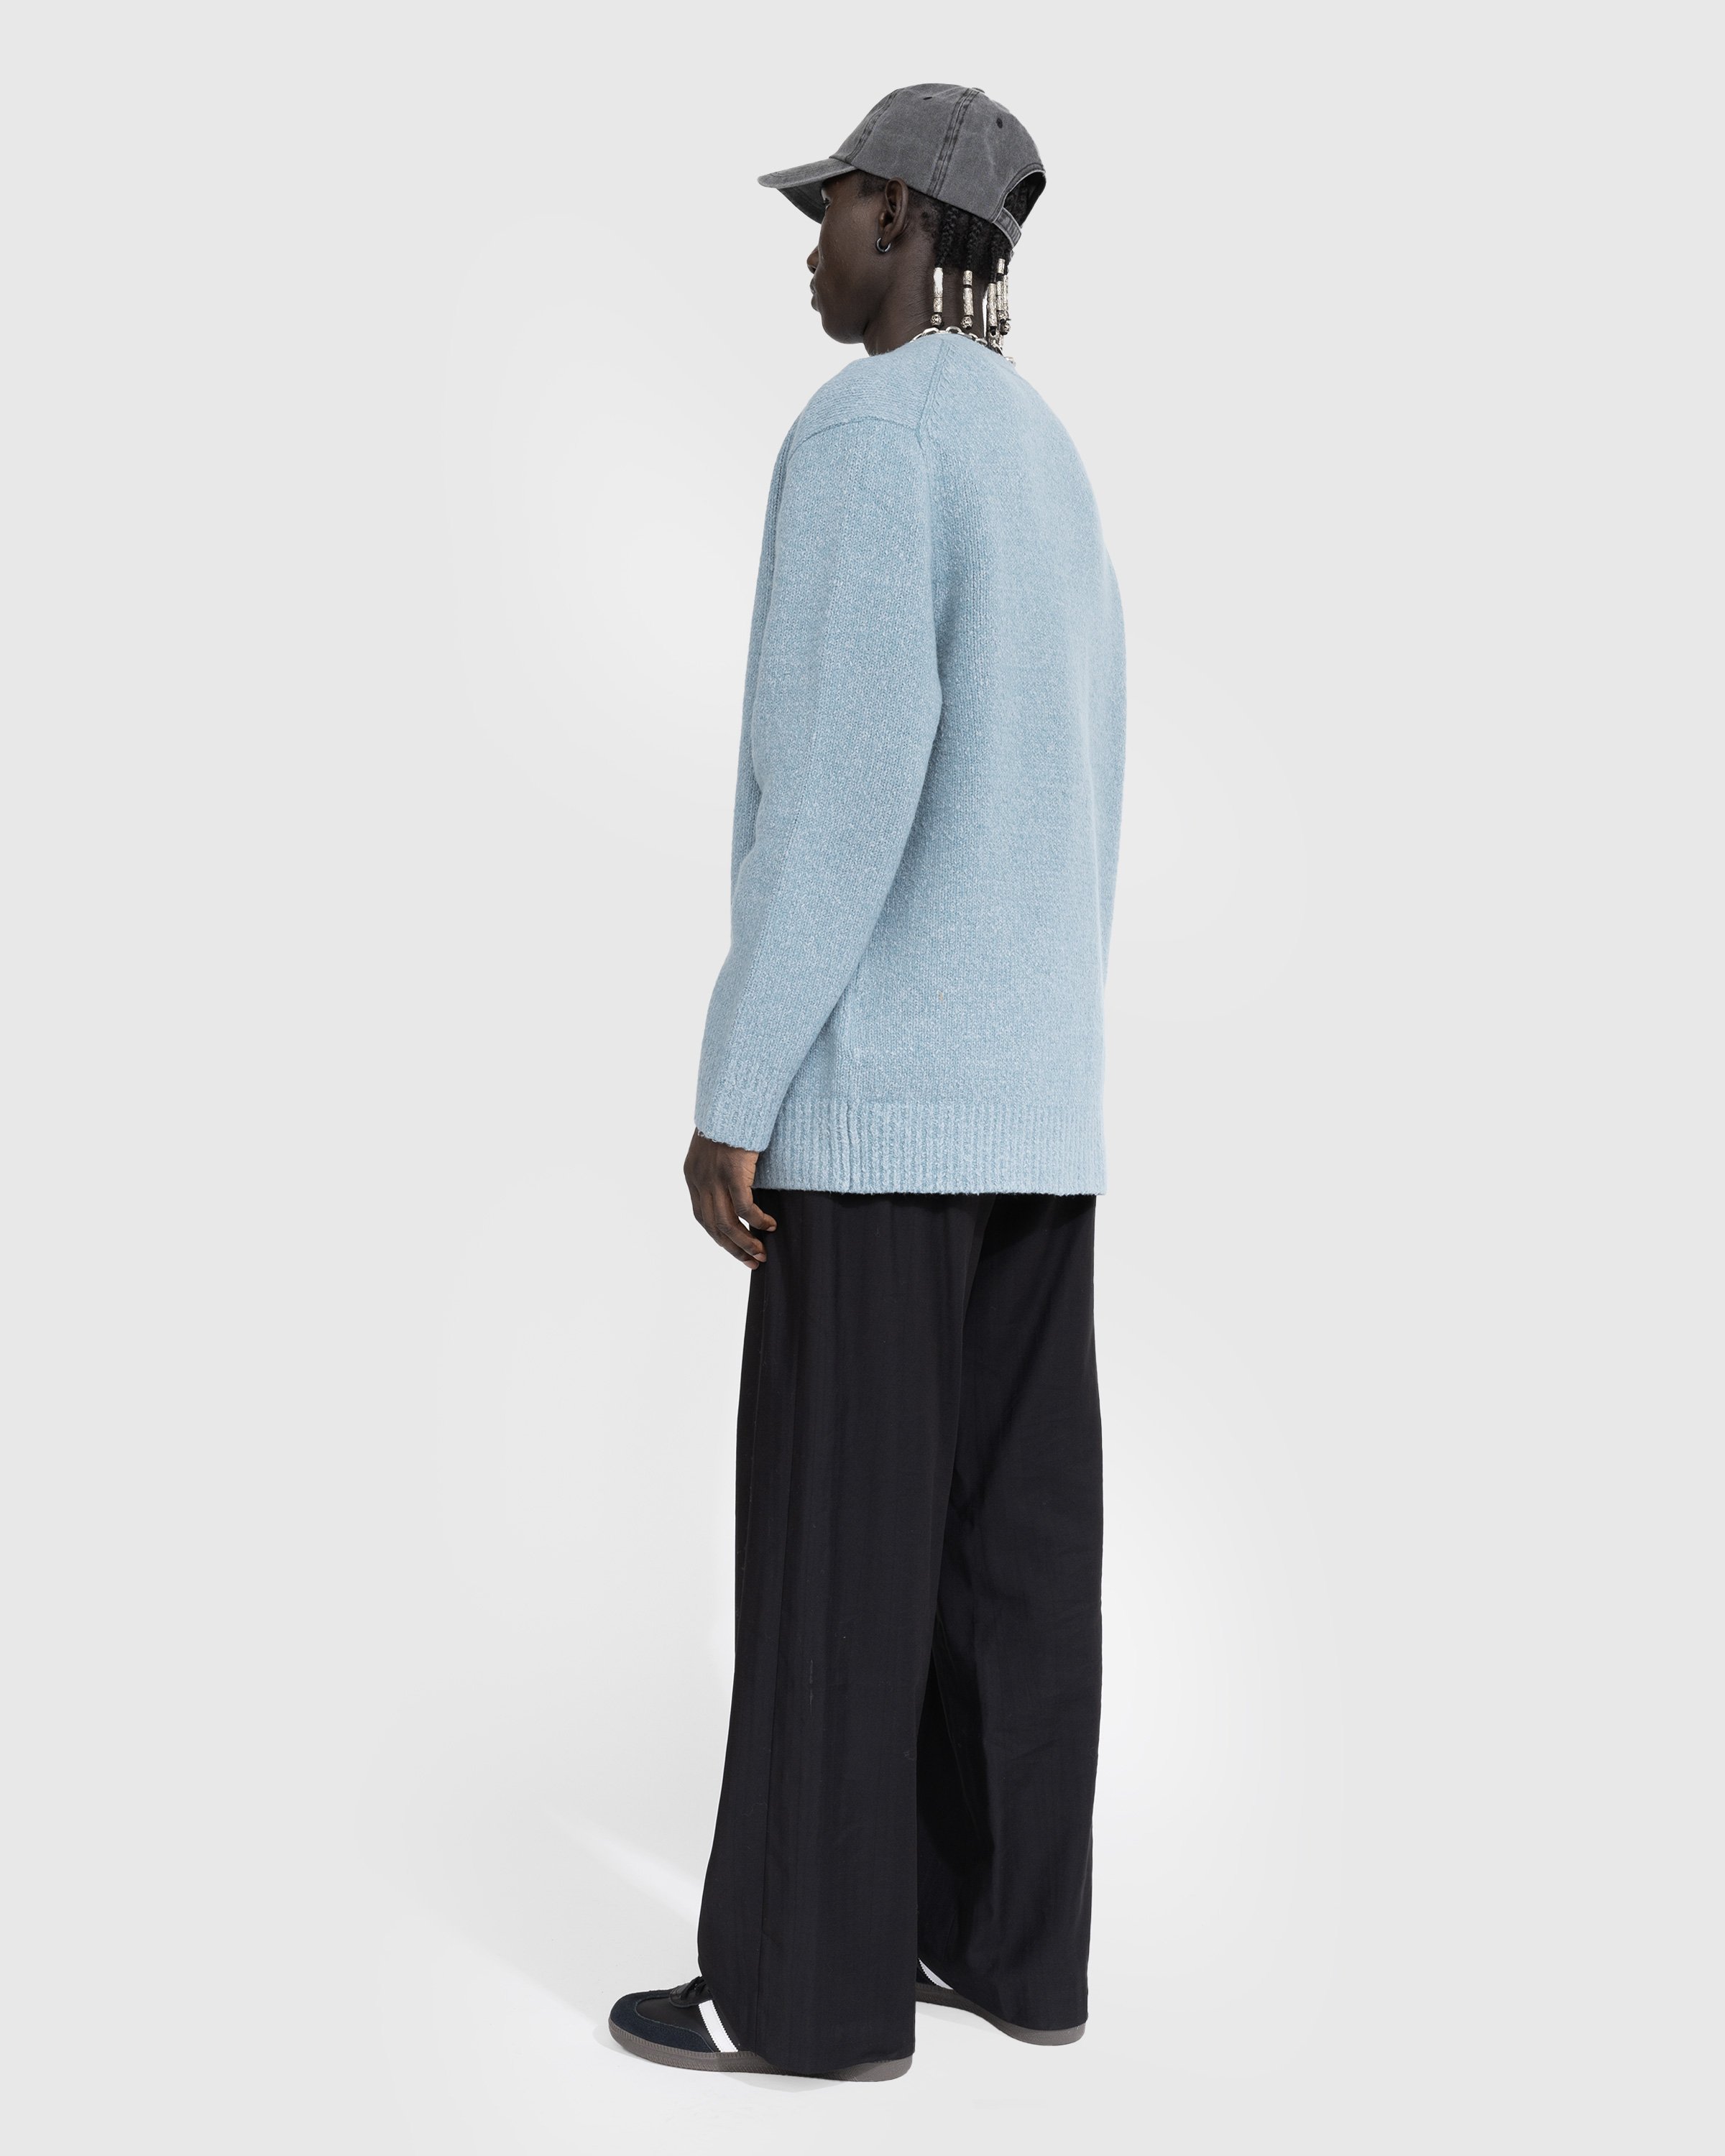 Acne Studios - FN-MN-KNIT000440 - Clothing - Blue - Image 4